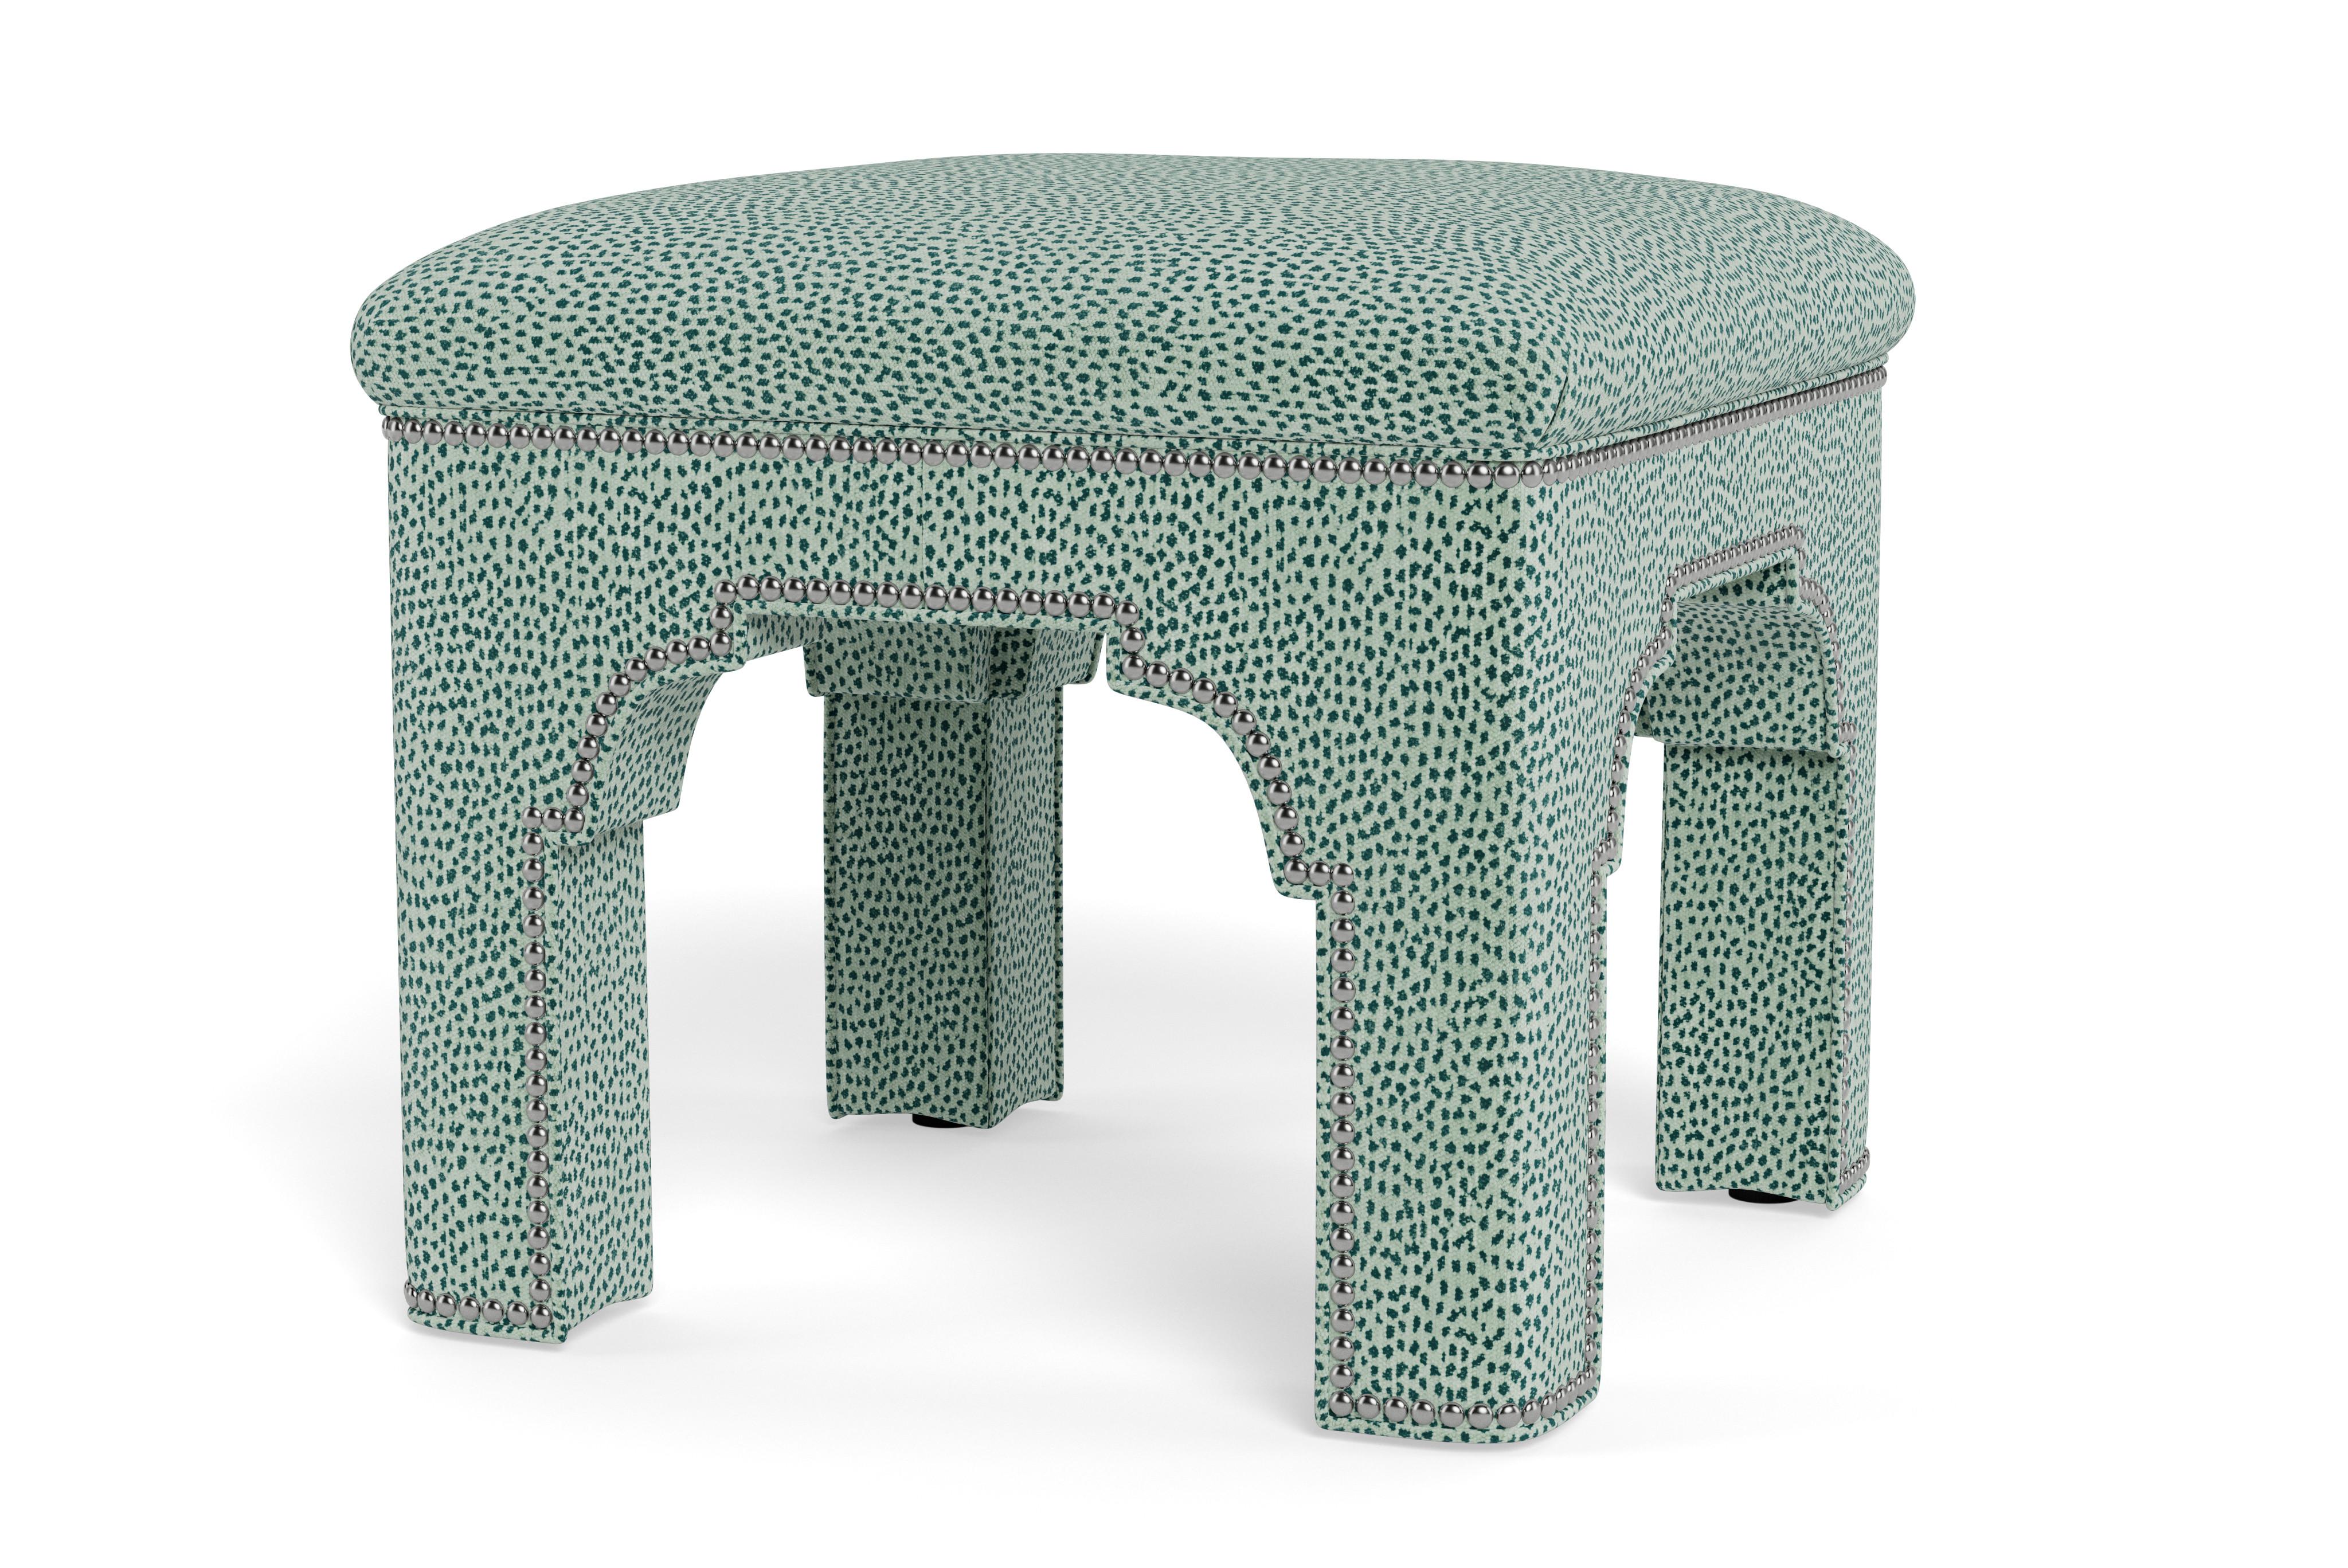 Add a chic accent to any room with this compact stool on its own or displayed in pairs.  Made to order in teal leopard chenille with antique nickel nail heads. The tightly upholstered seat covers a solid maple frame. A Mughal-inspired arch make it a